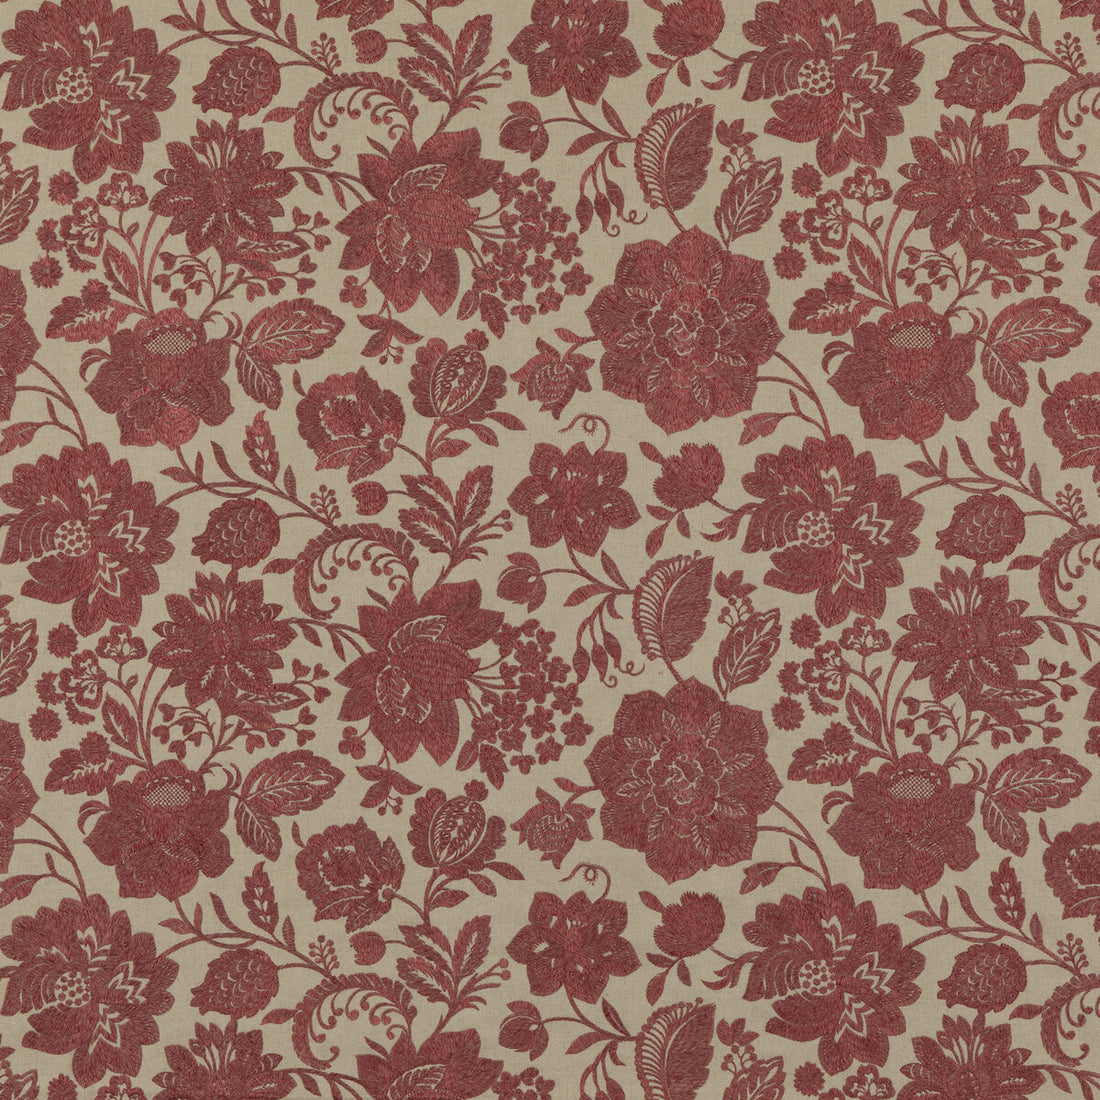 Berwick fabric in red color - pattern BF10918.2.0 - by G P &amp; J Baker in the Portobello collection